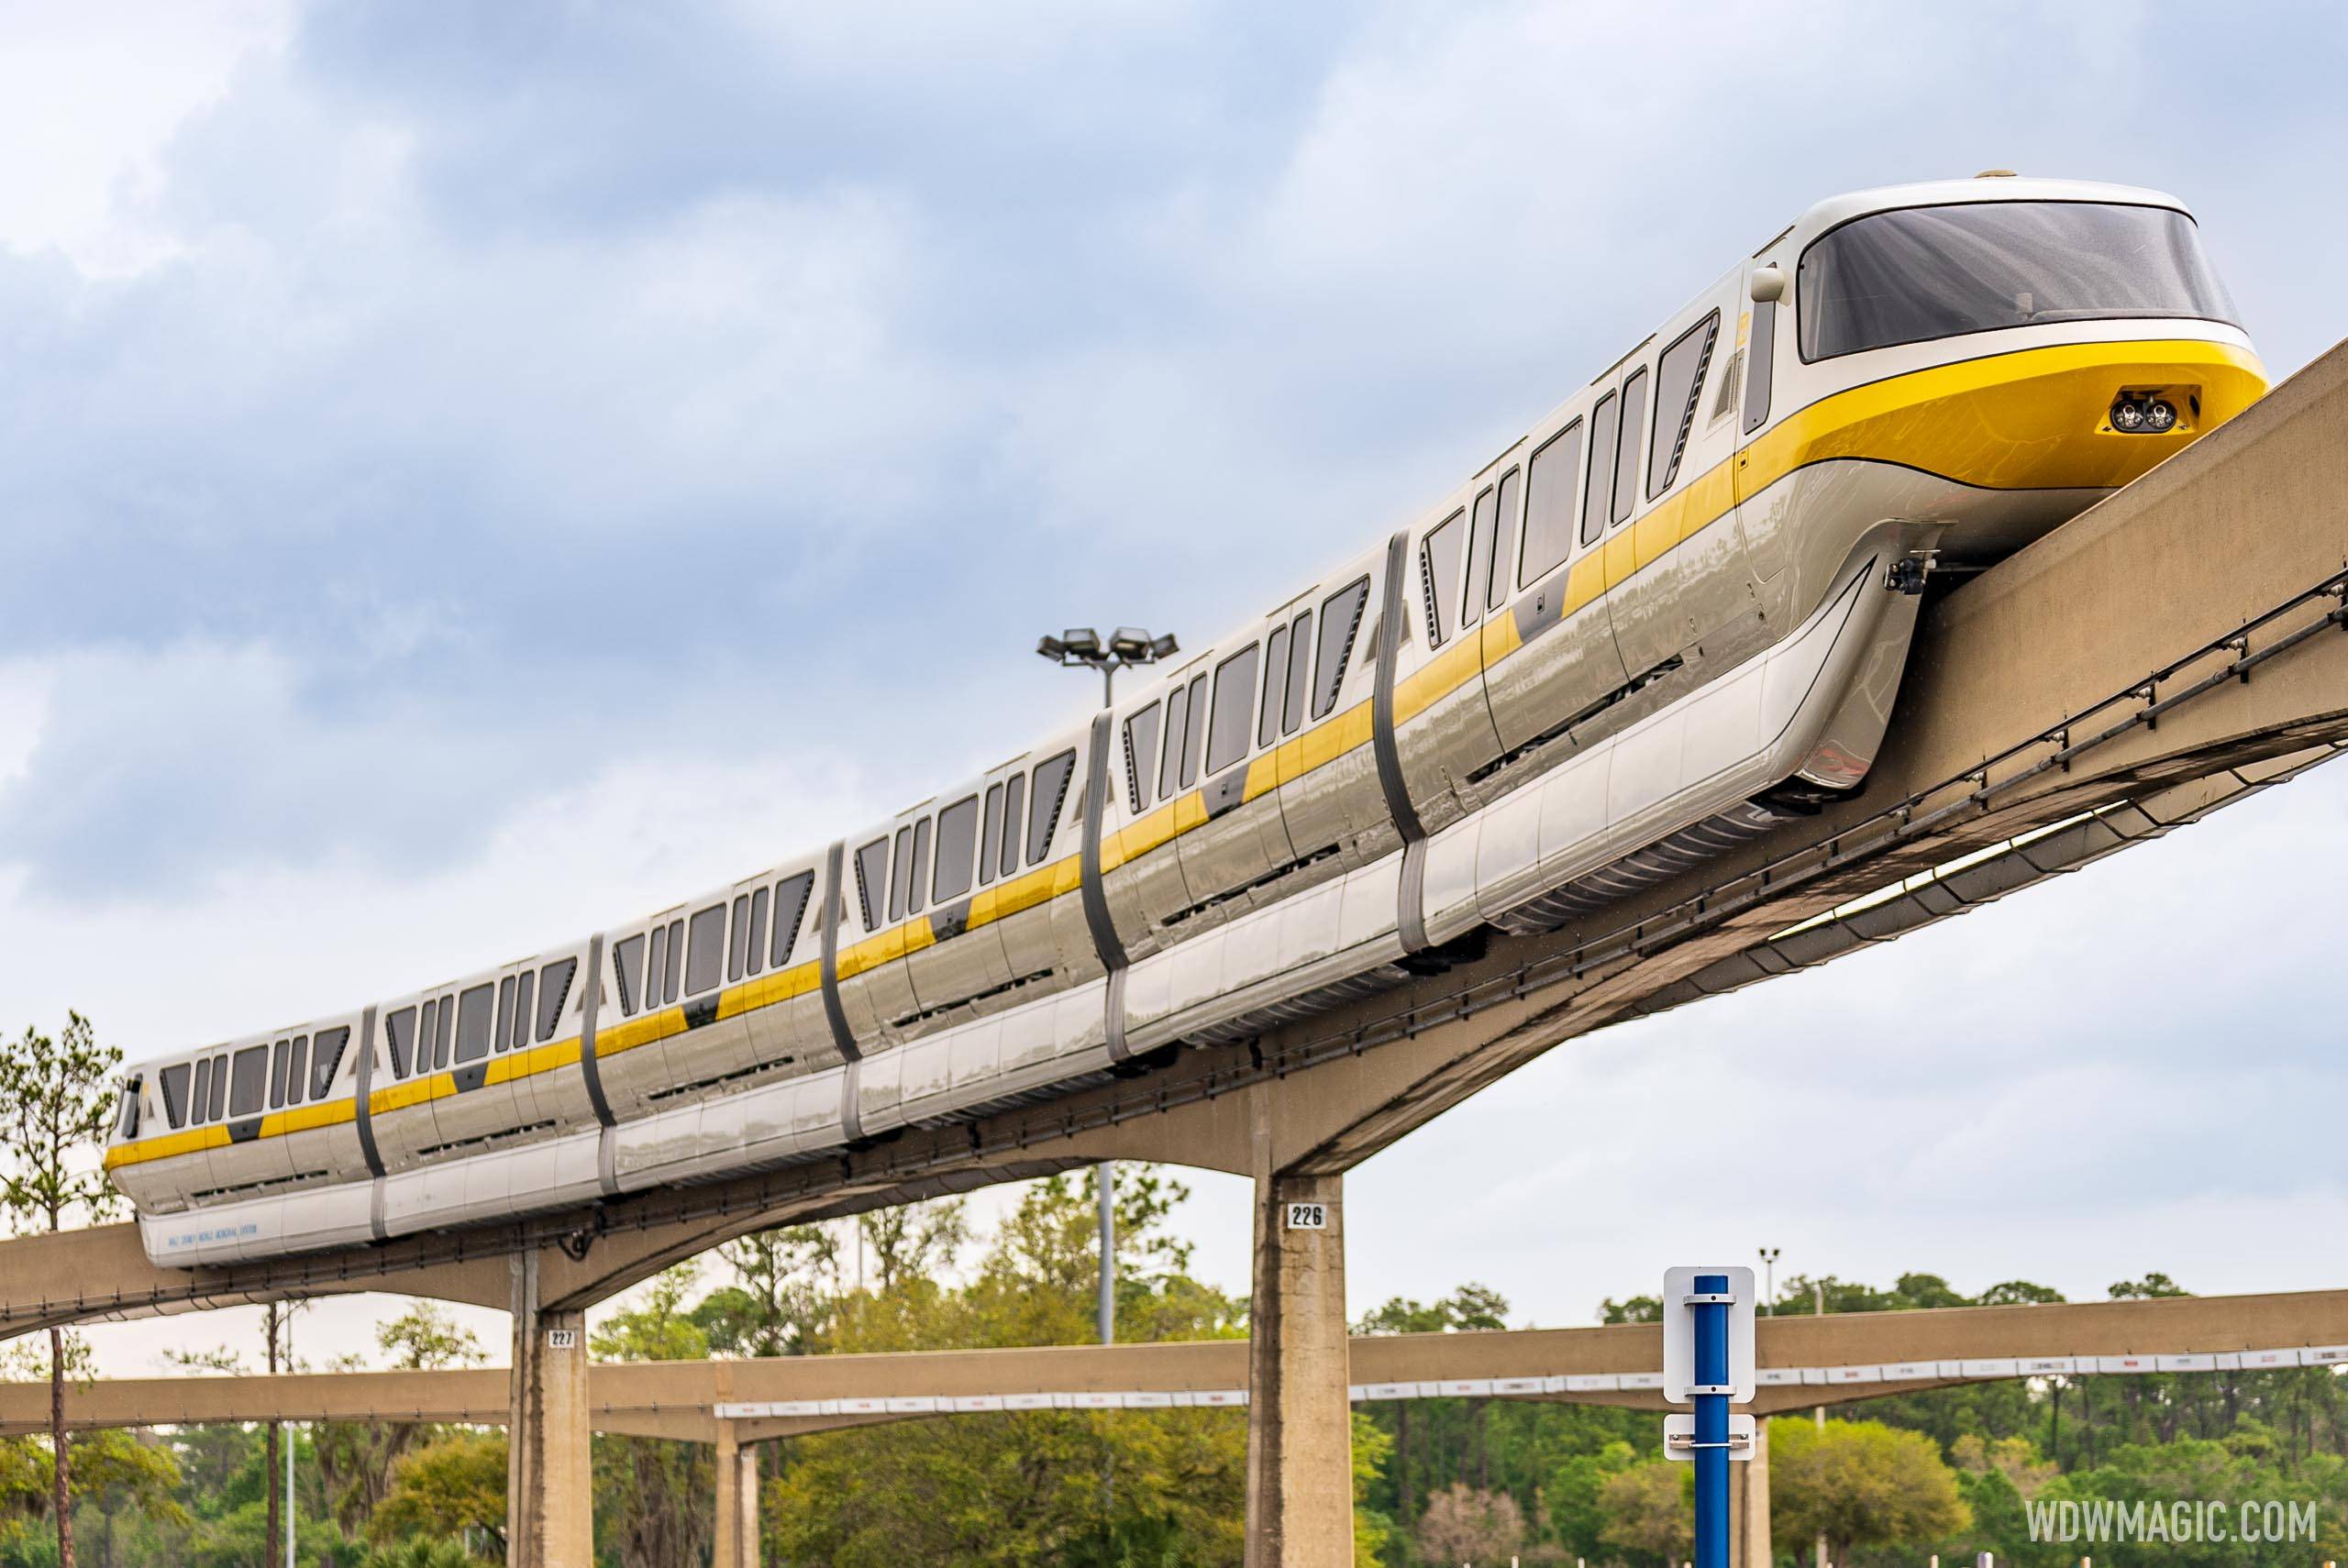 Refurbished Monorail Yellow on the EPCOT Beam leaving the EPCOT station